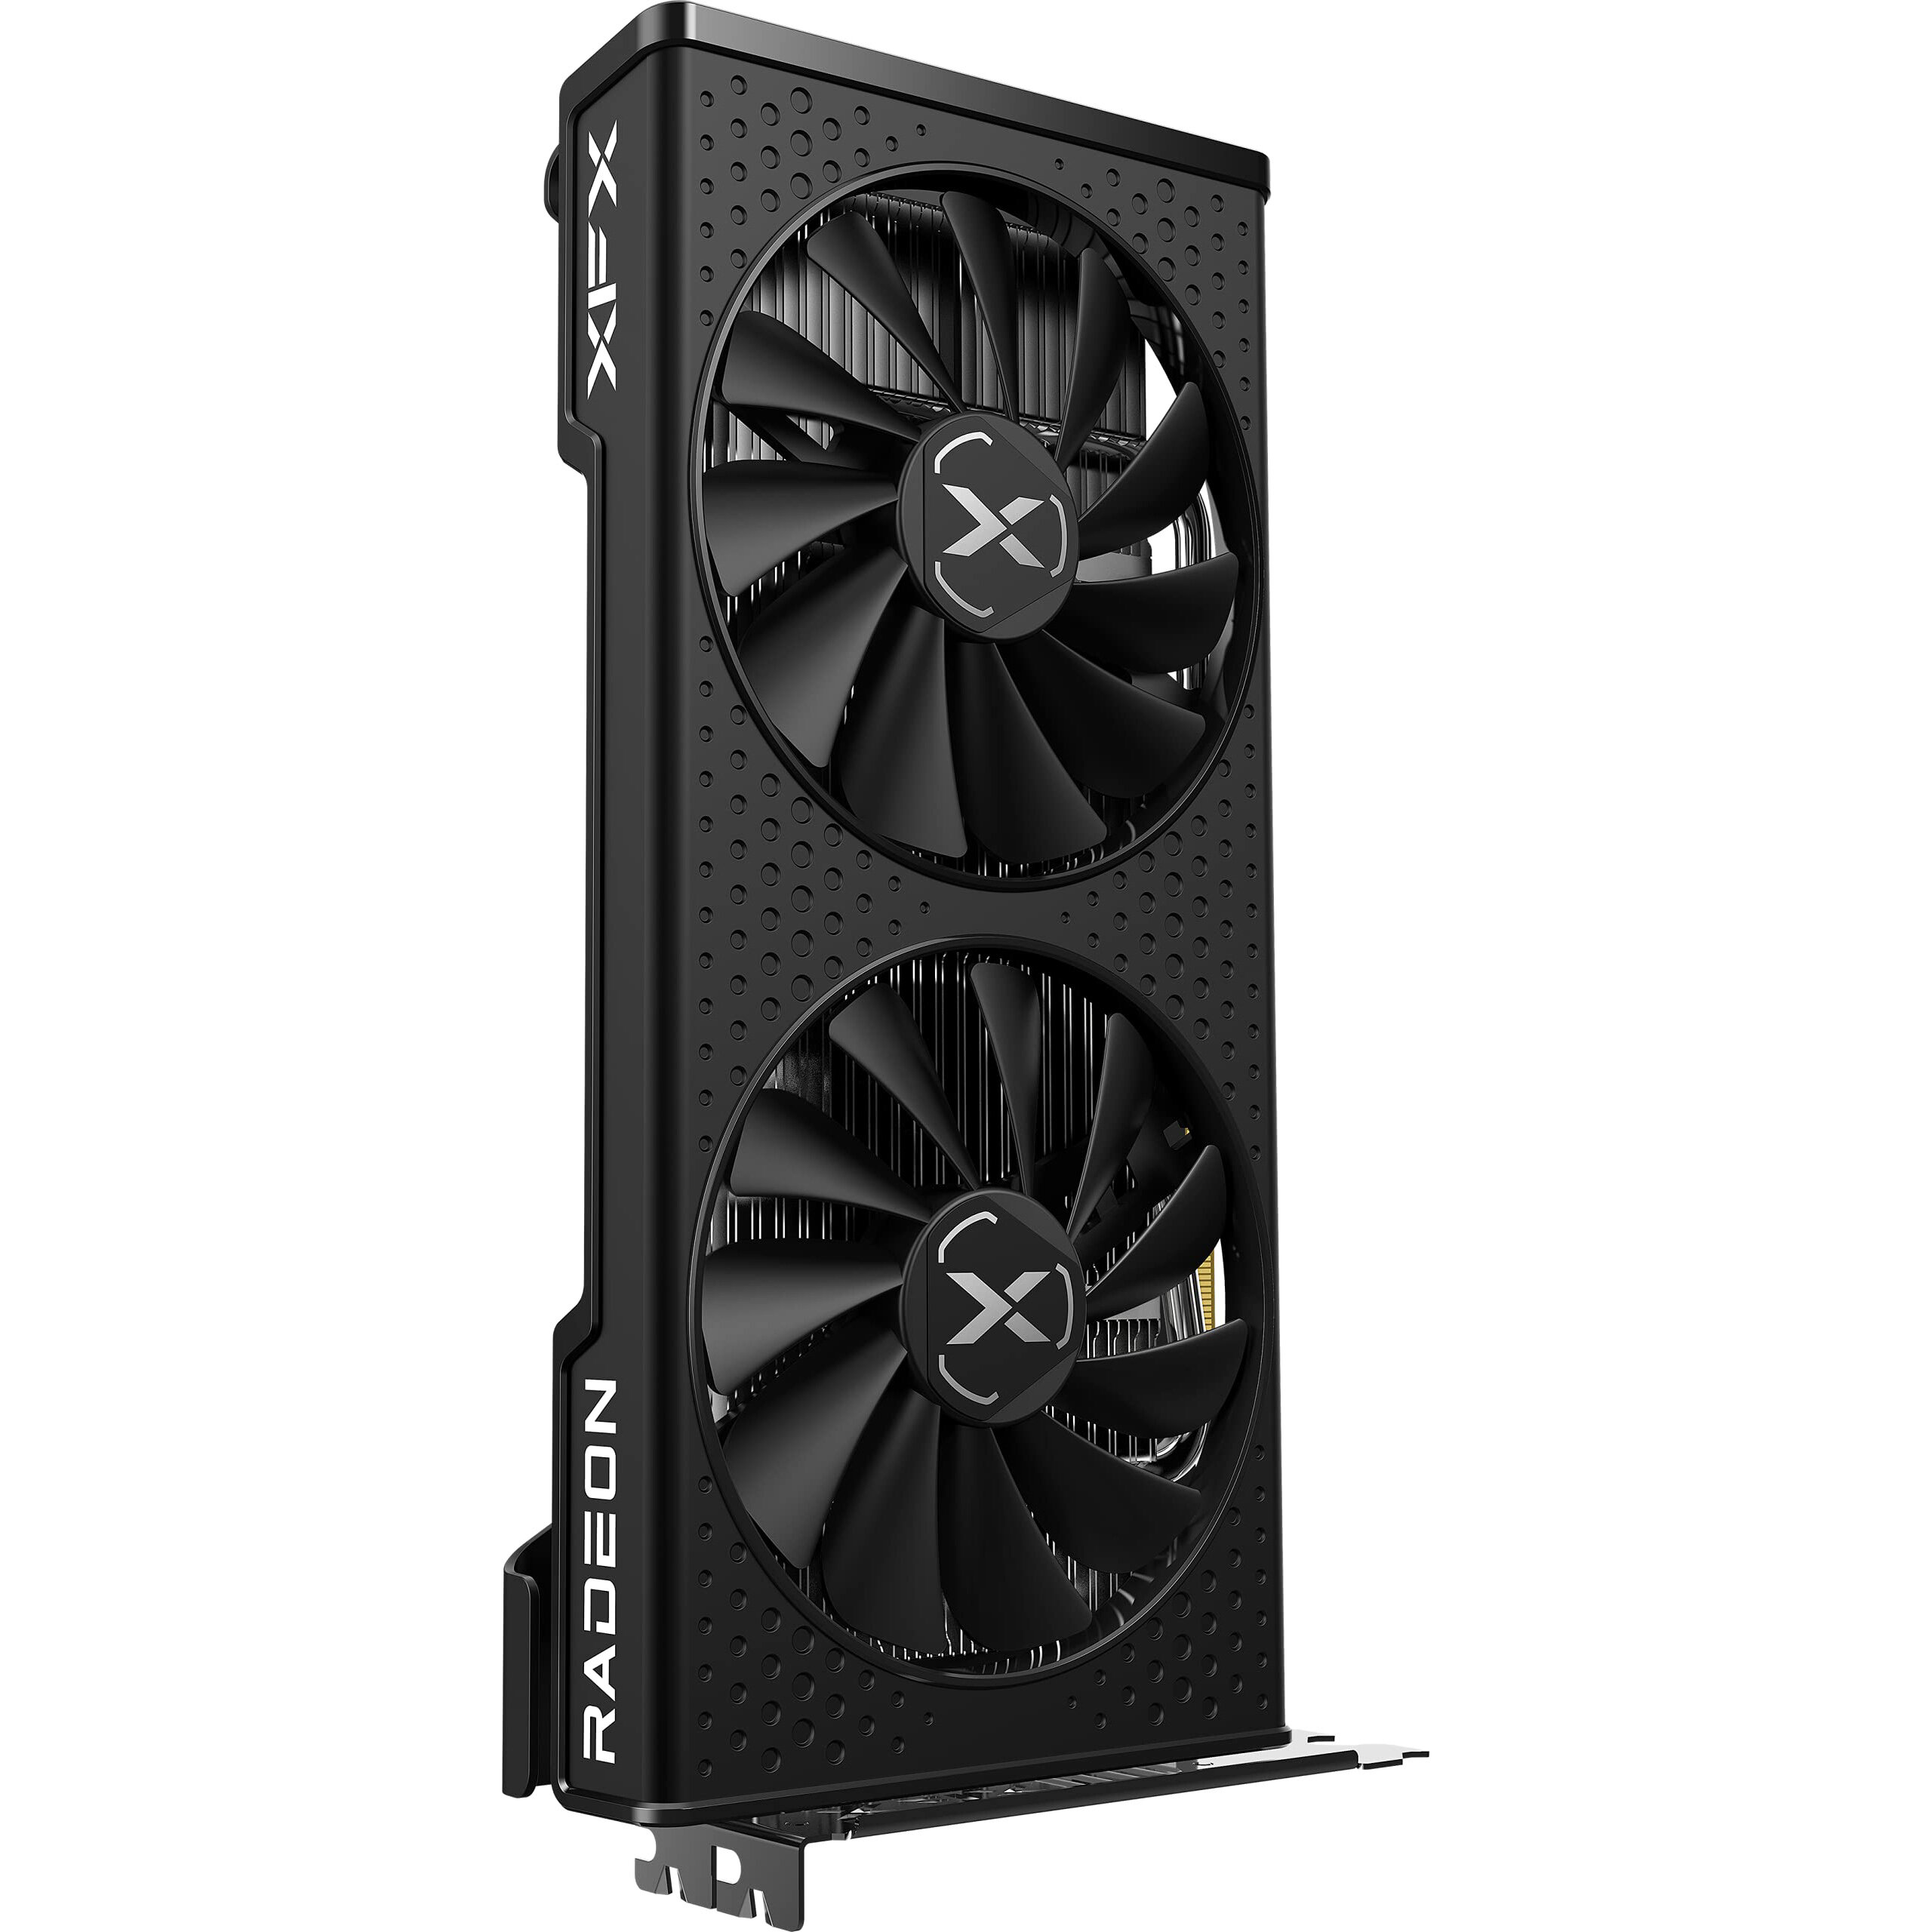 XFX Speedster SWFT 210 Radeon RX 6600 CORE Gaming Graphics Card with 8GB GDDR6 HDMI 3xDP AMD RDNA 2